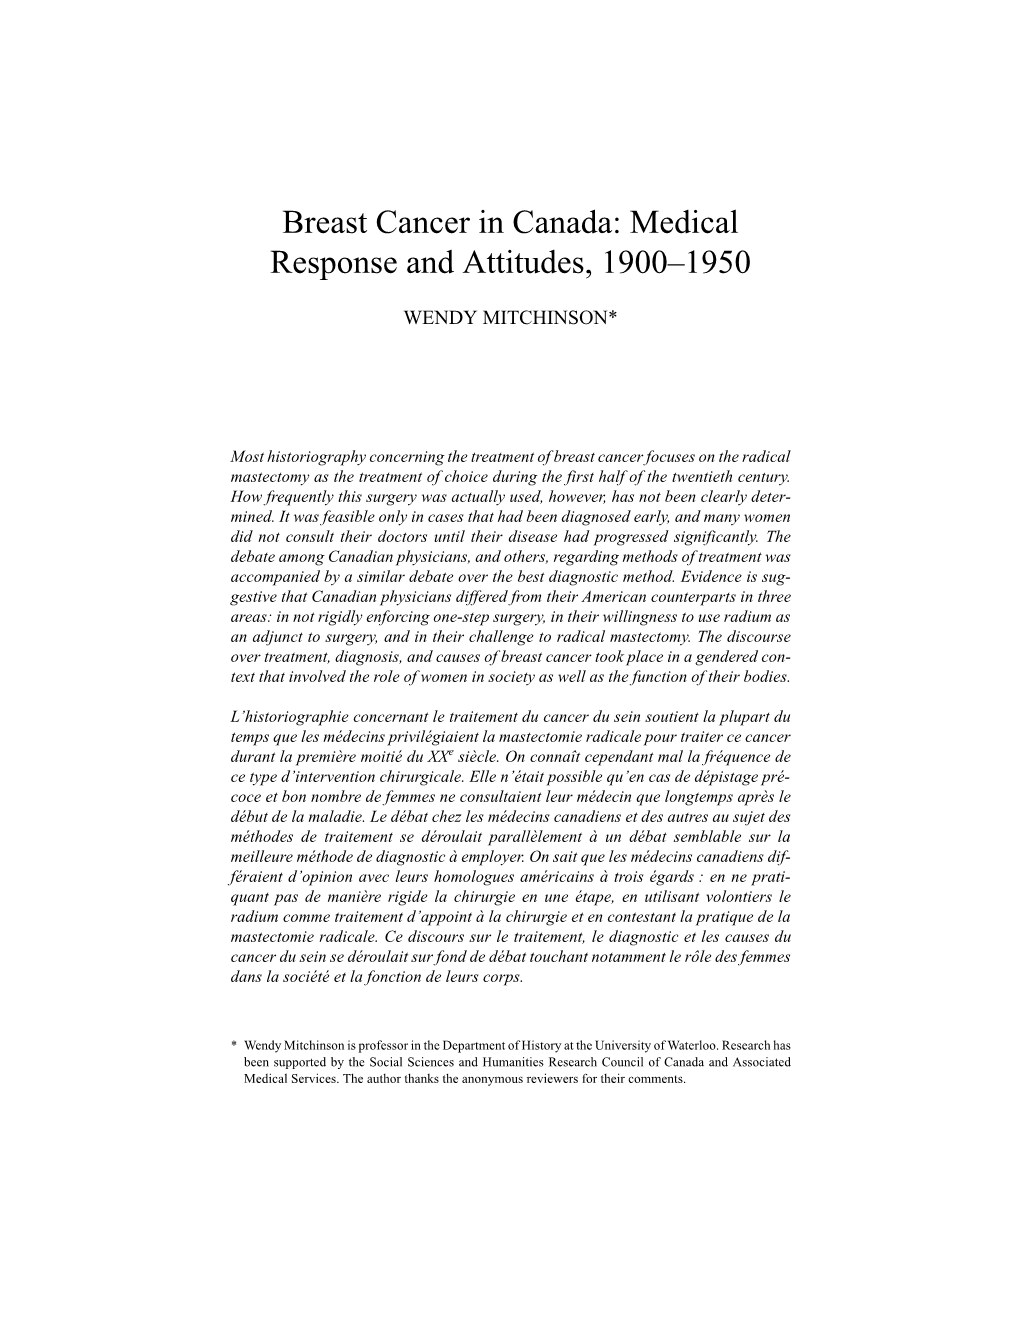 Breast Cancer in Canada: Medical Response and Attitudes, 1900–1950